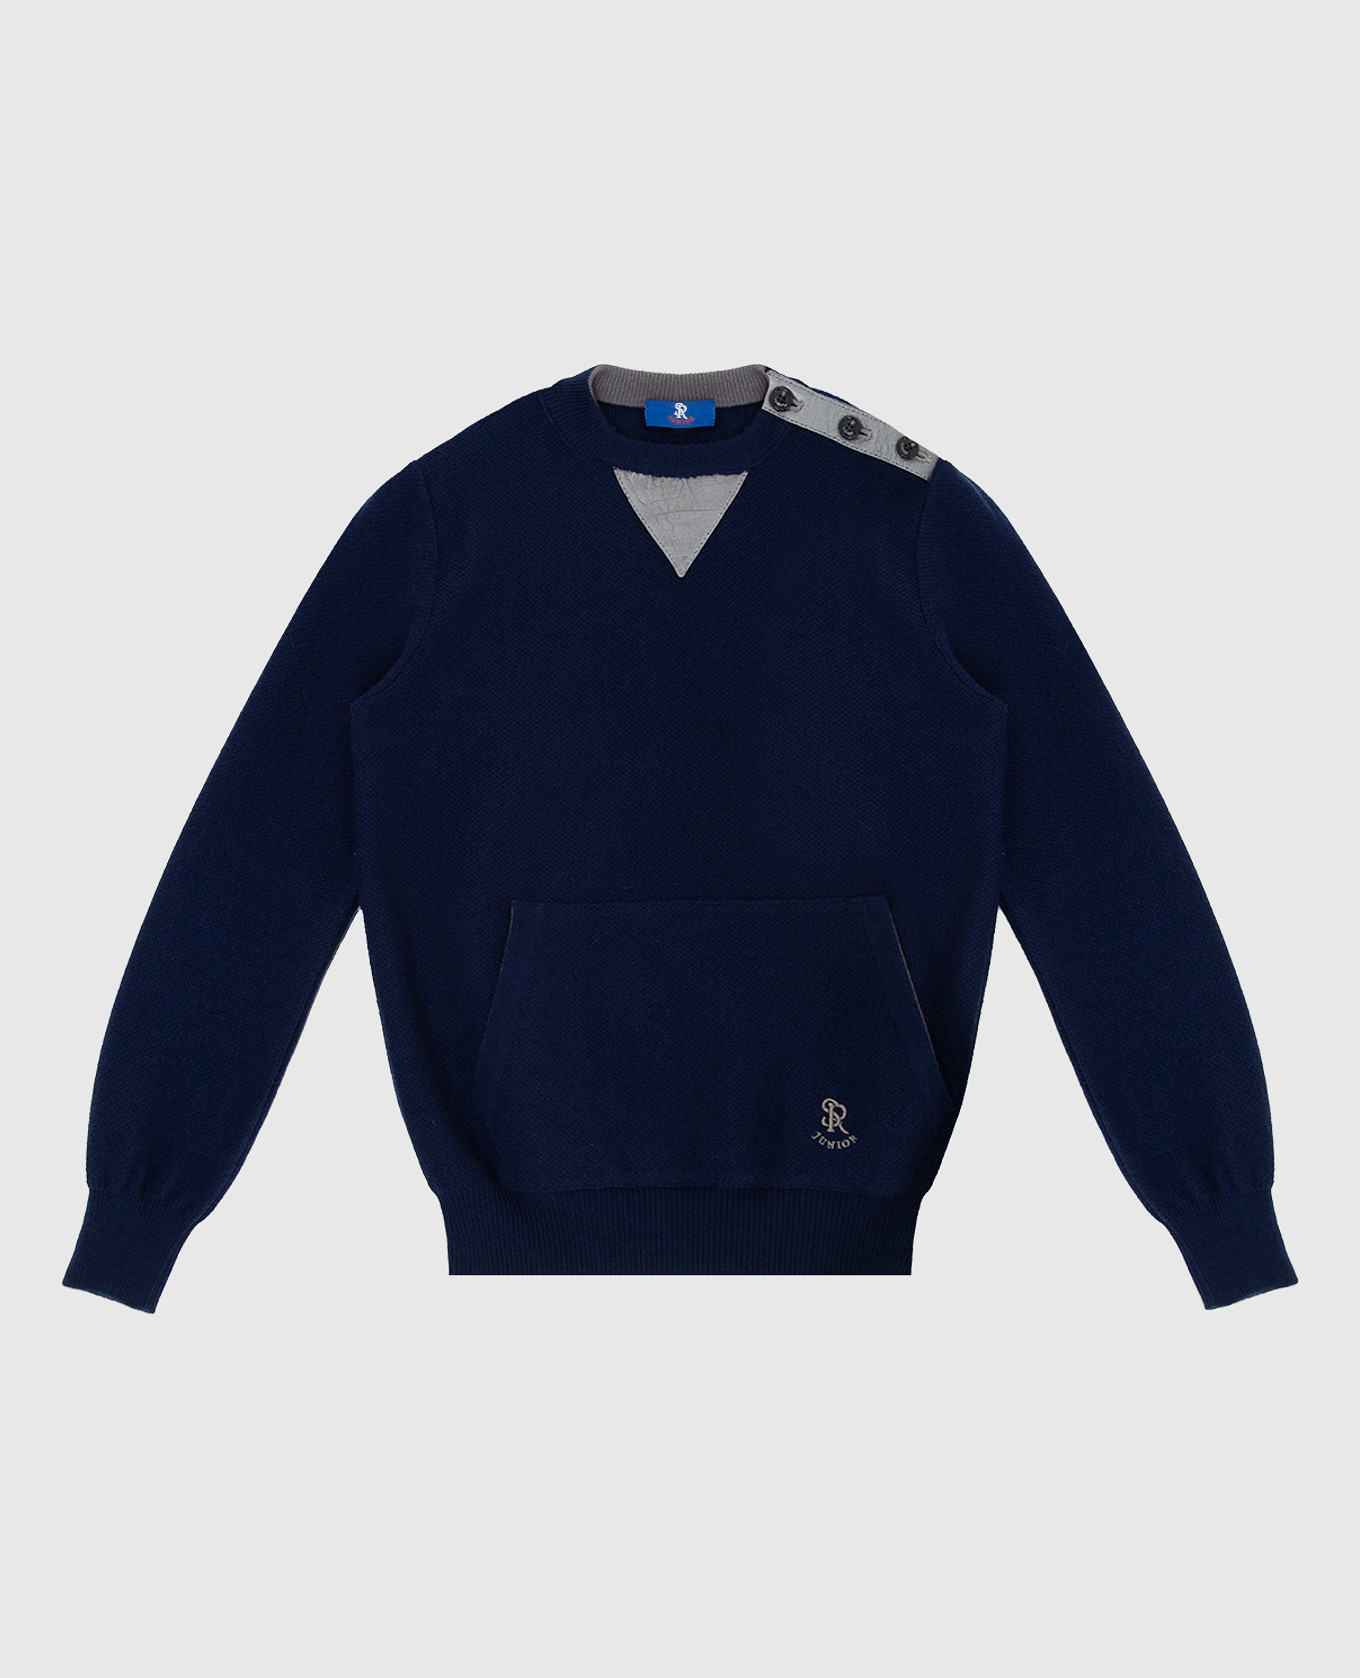 Children's cashmere sweater with logo